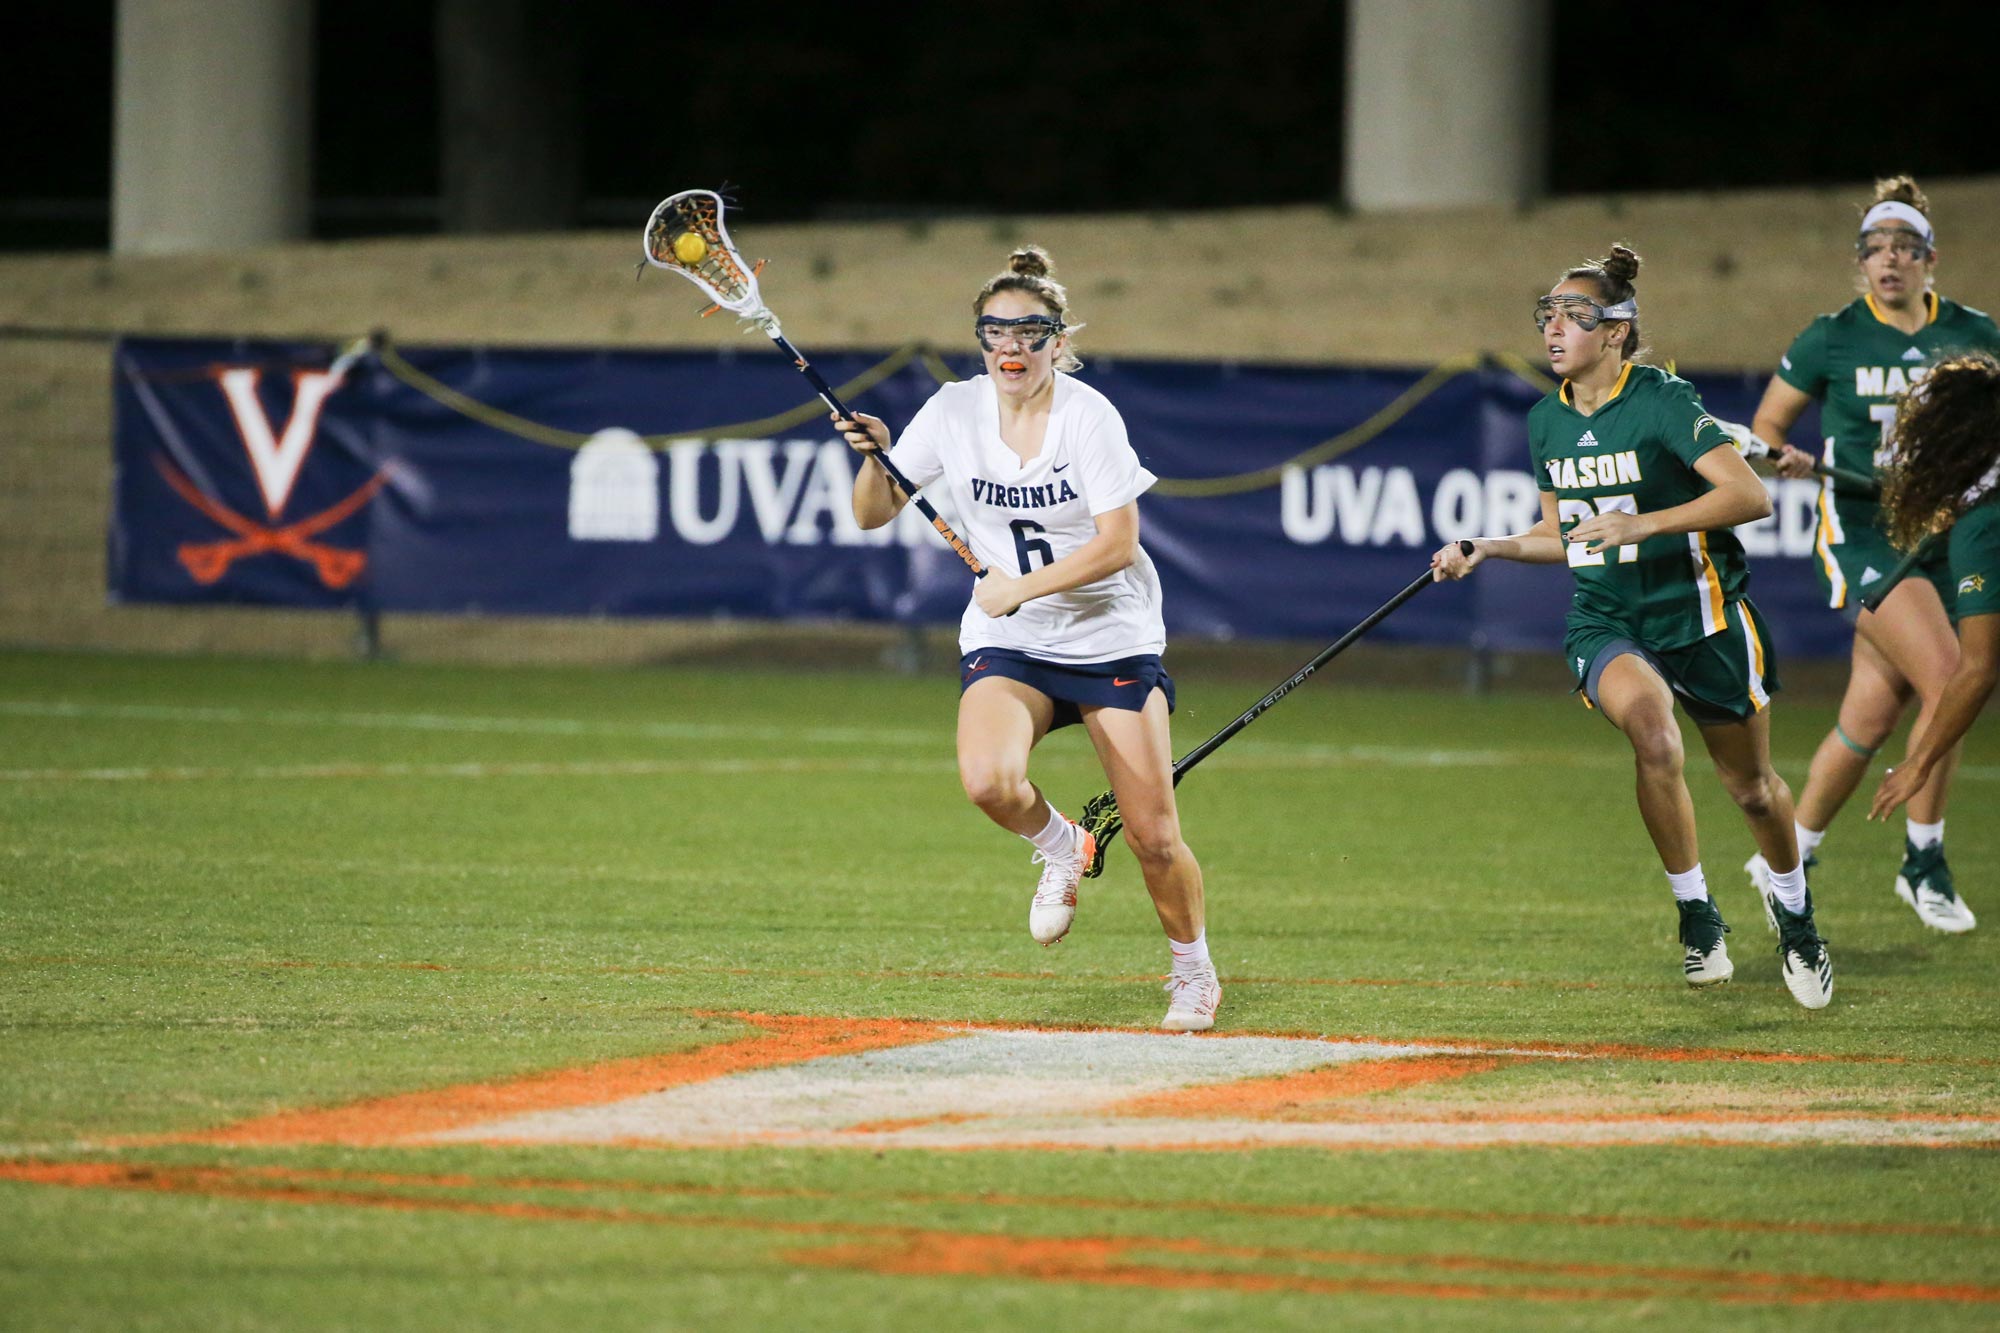 Gwin Sinnott running down the field with the ball during a lacrosse game